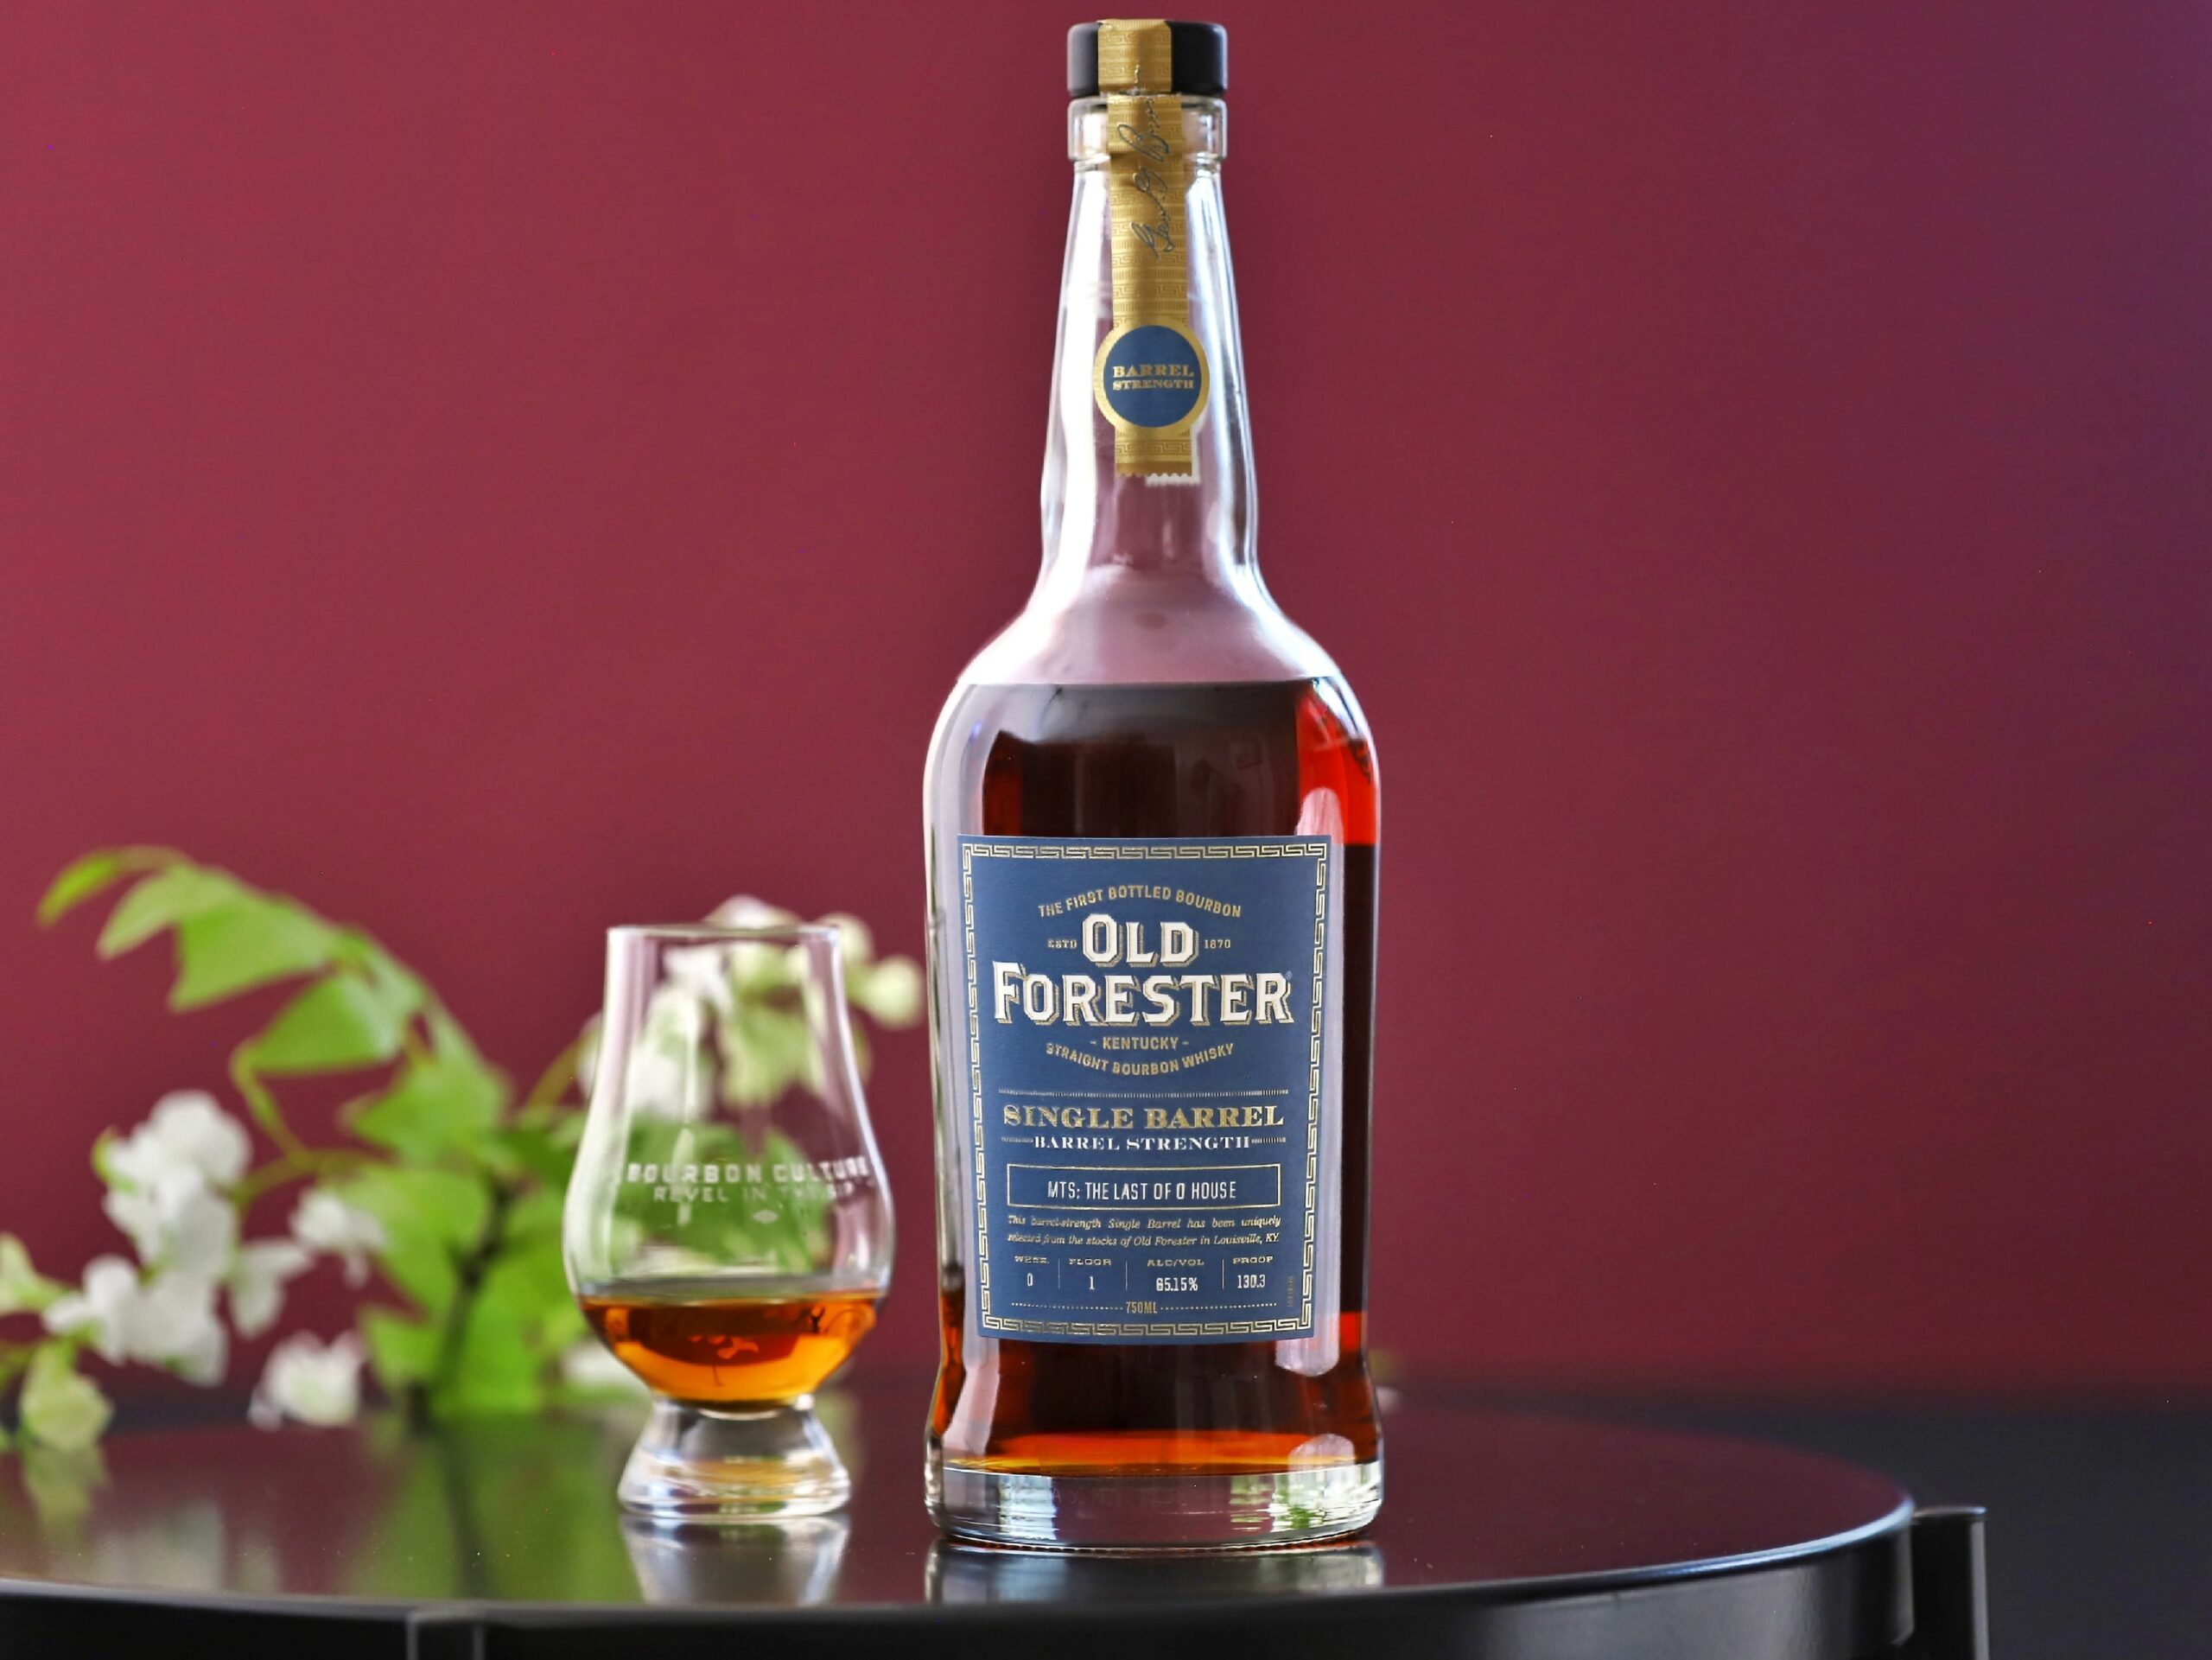 Old Forester Barrel Strength Single Barrel “MTS: The Last of O House” Review